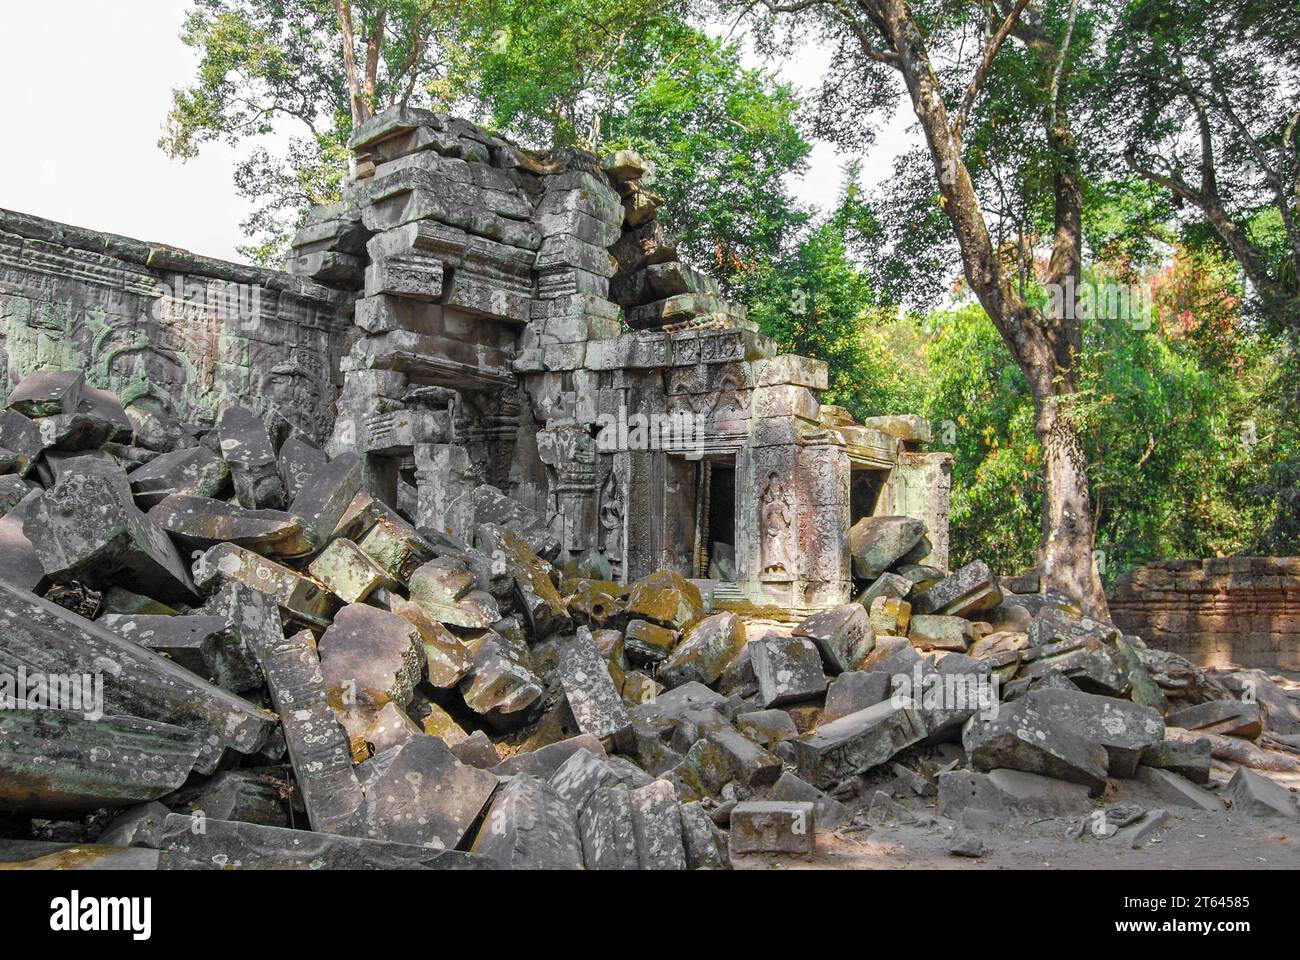 Covered with moss and lichen stones near the temple of Banteay Kdei. Angkor Thom. Cambodia Stock Photo